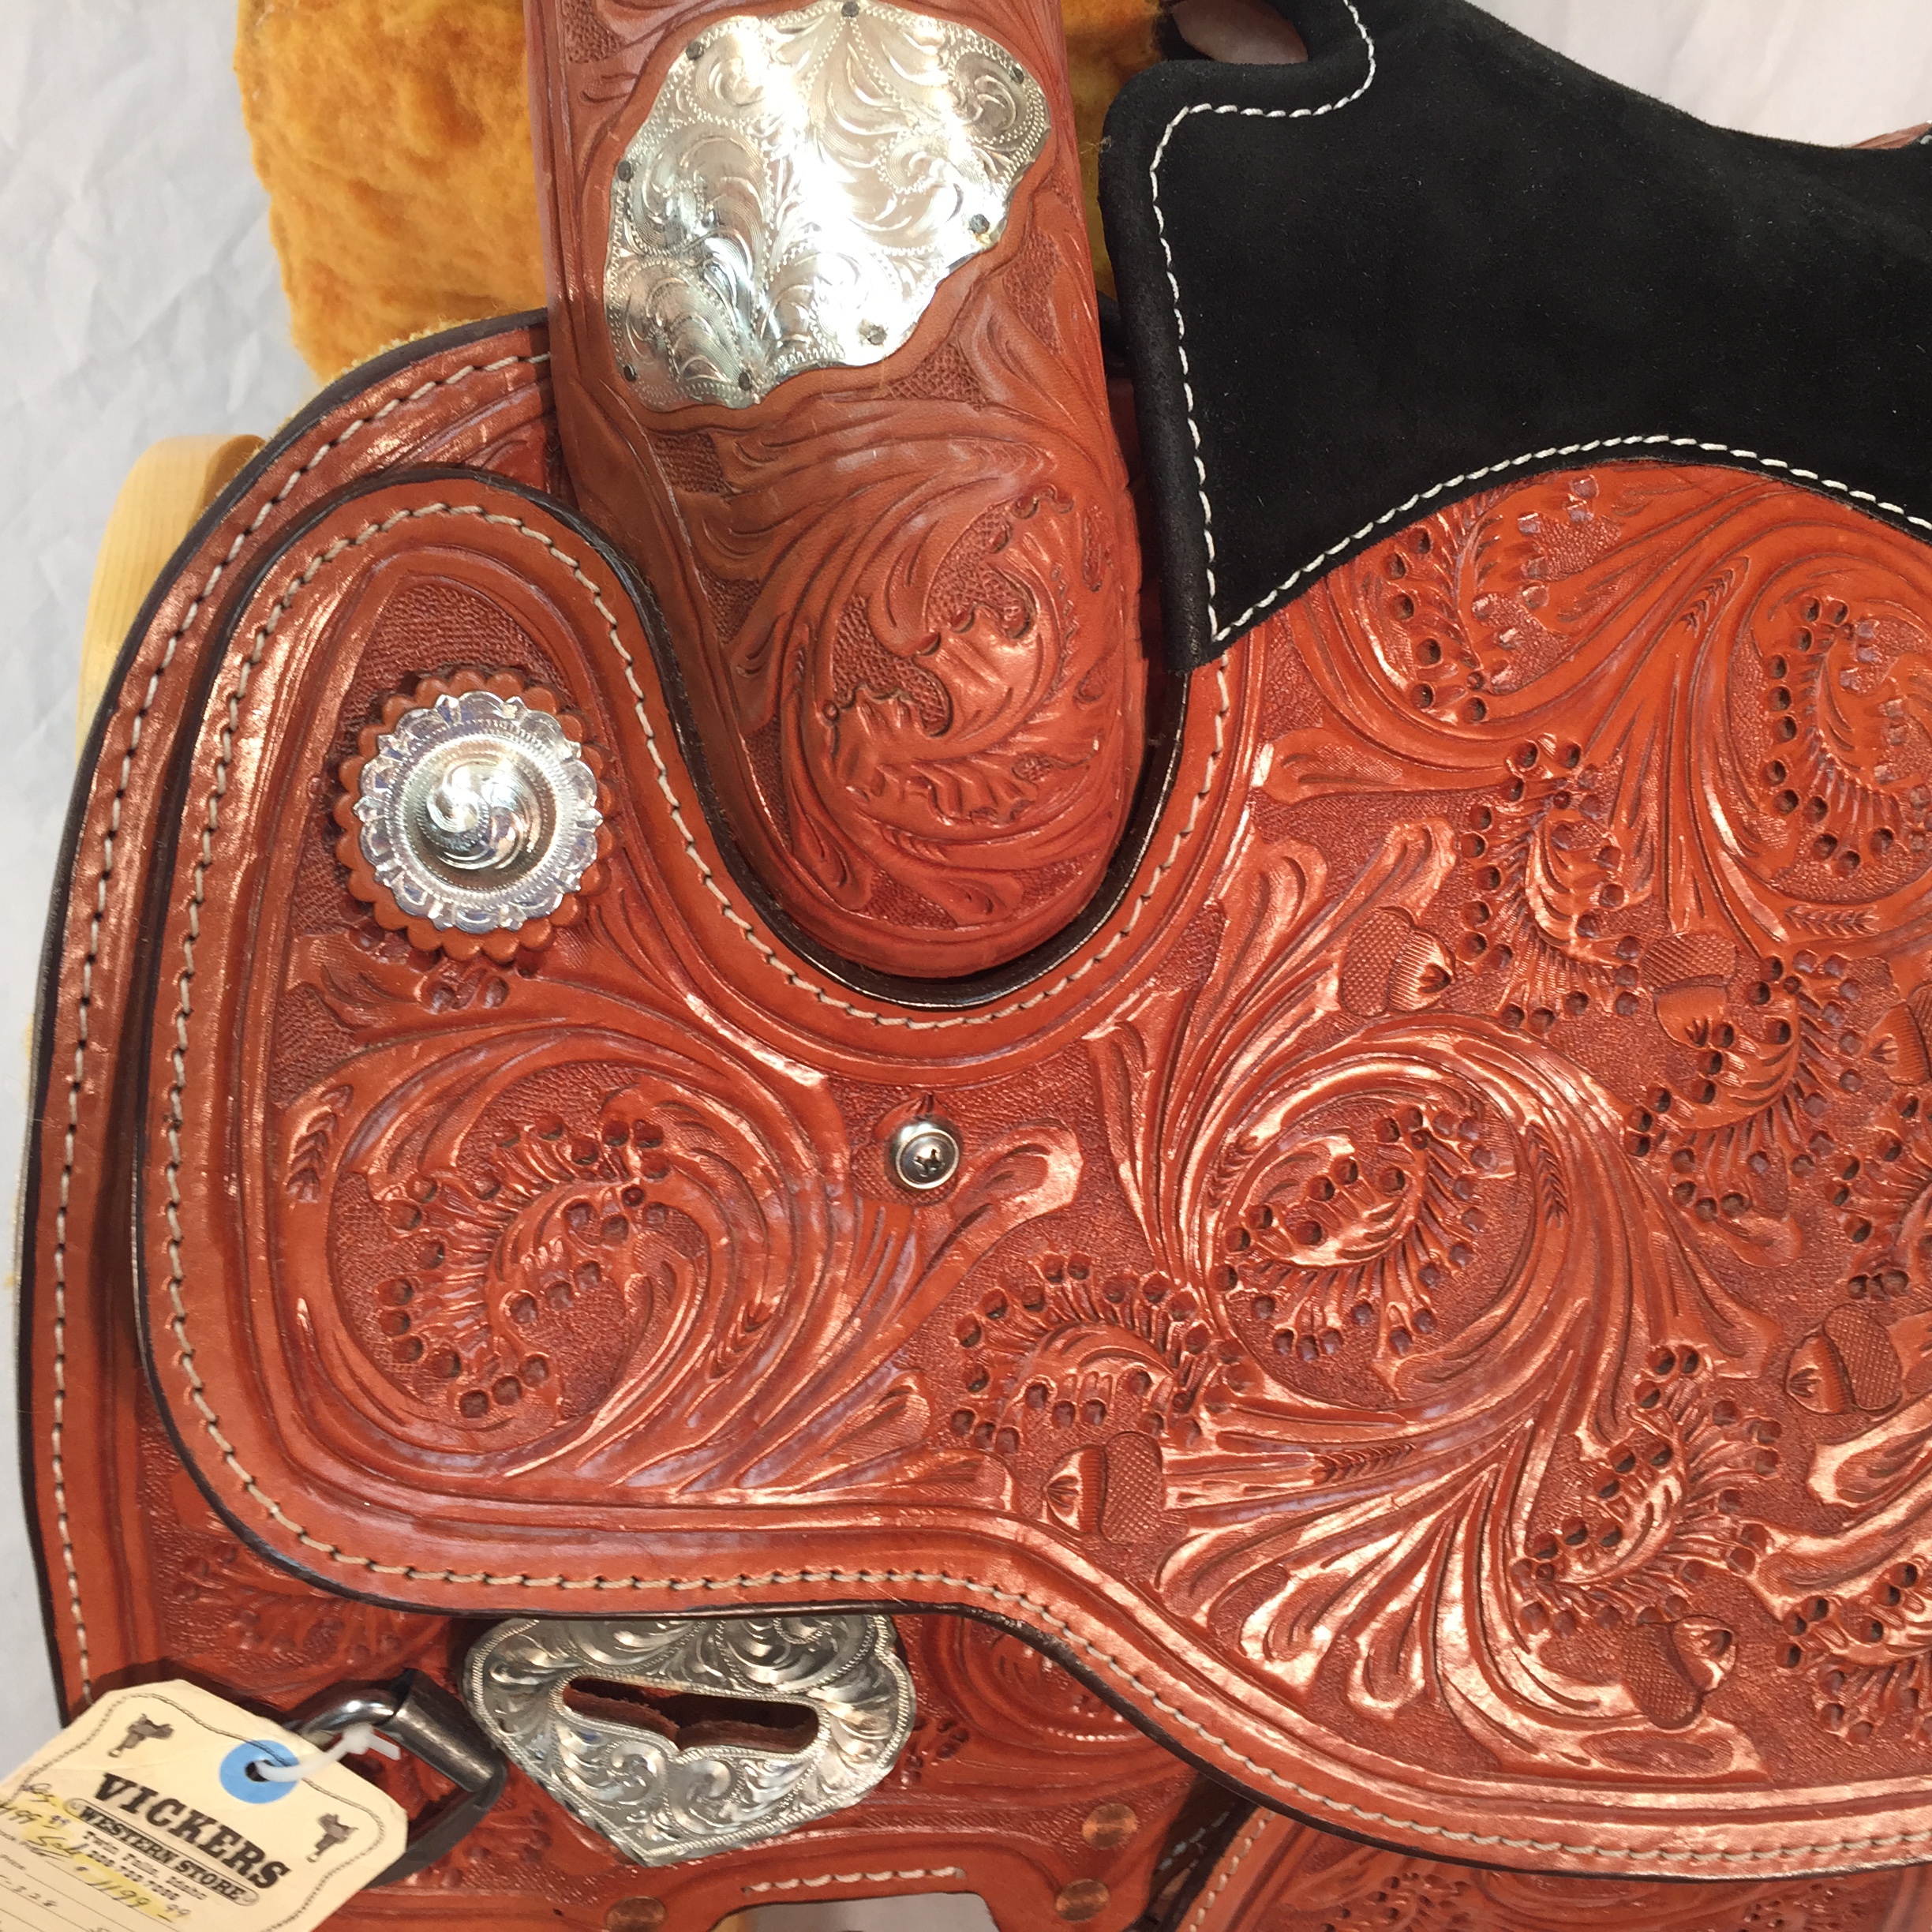 Vickers Classic Show Saddle 53